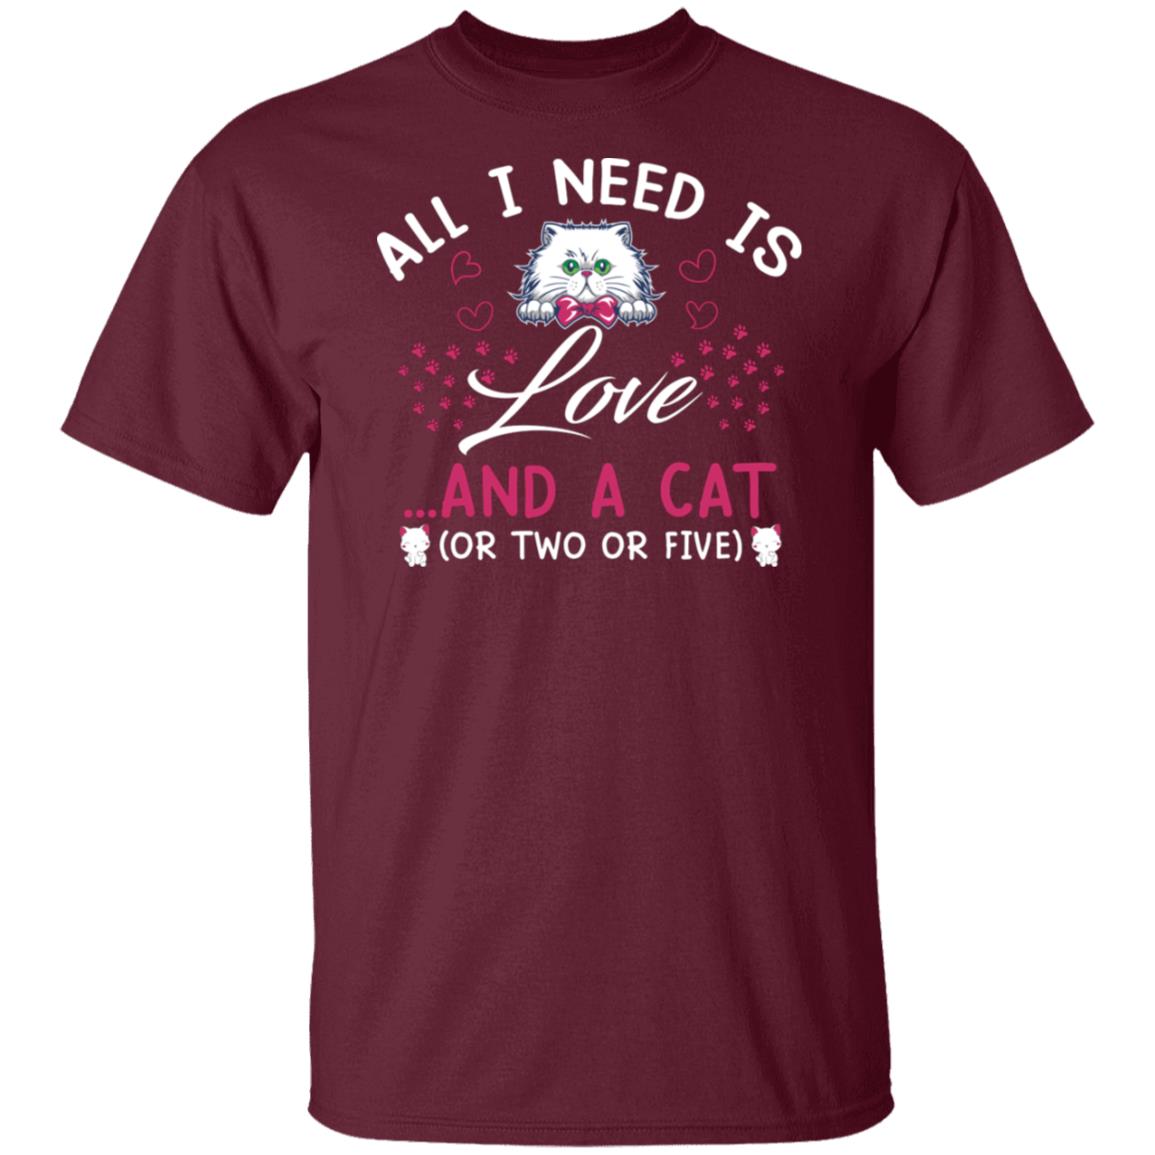 All I need is love and a cat or (two or five) tshirt